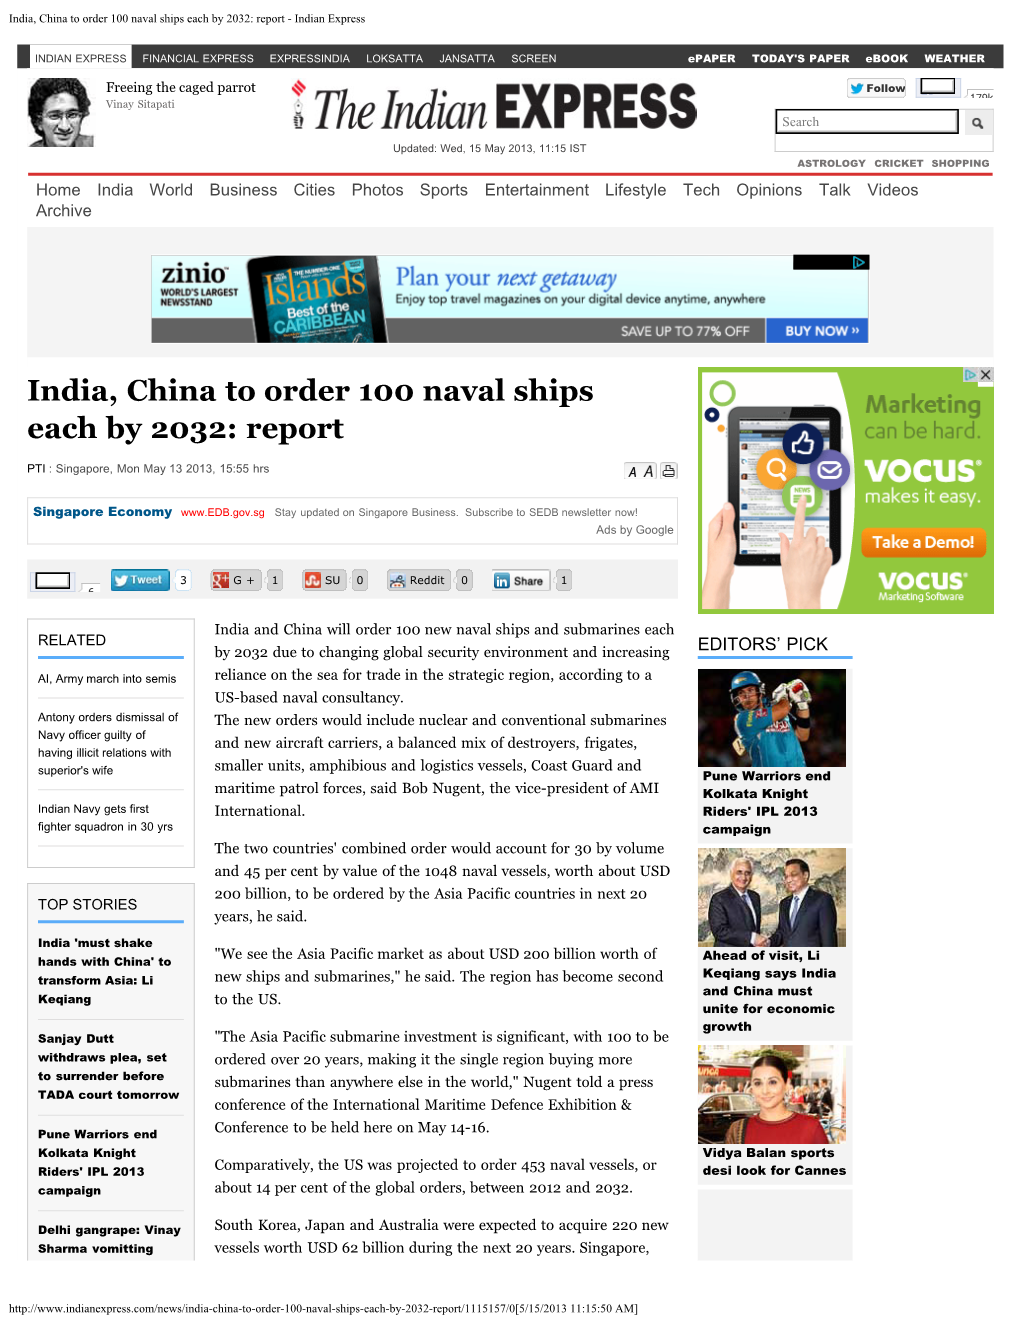 India, China to Order 100 Naval Ships Each by 2032: Report - Indian Express